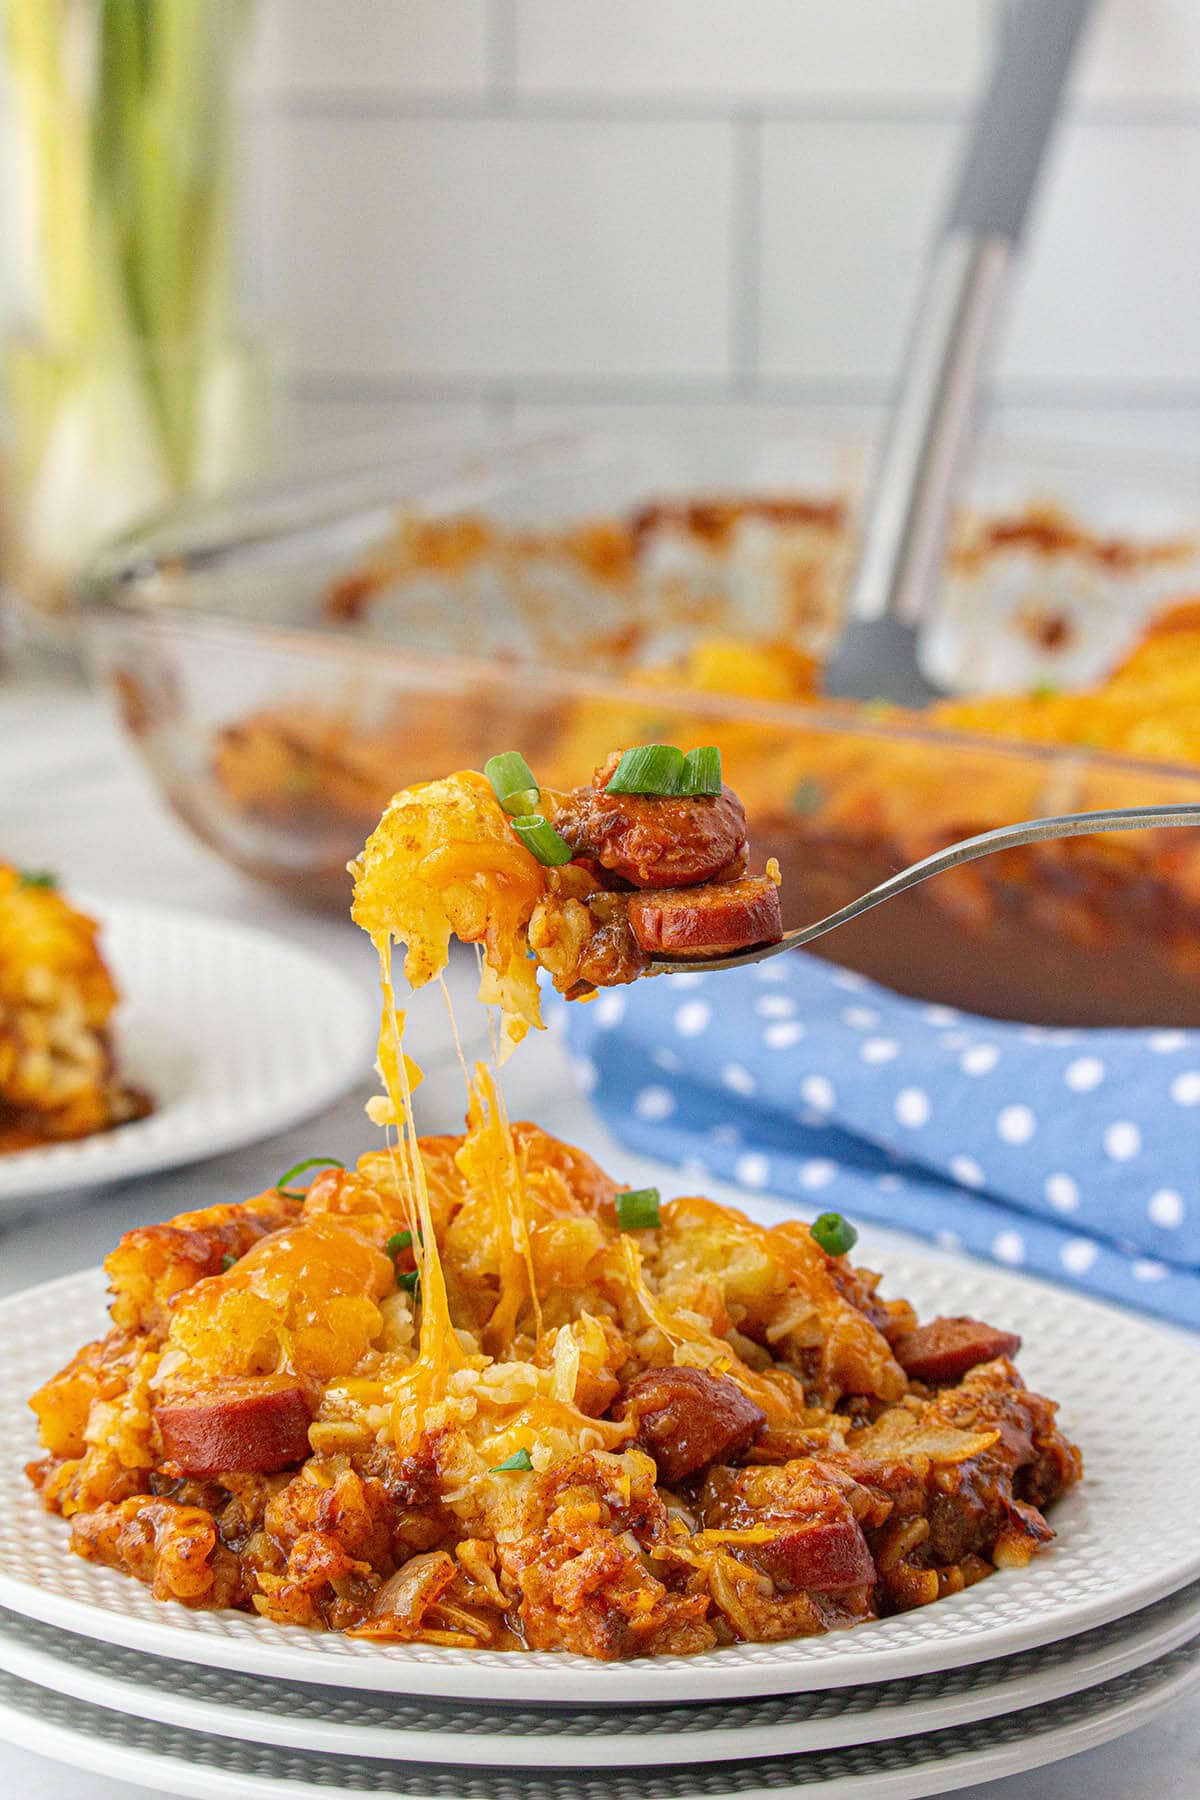 Chili Dog Tater Tot Casserole on plate with fork.